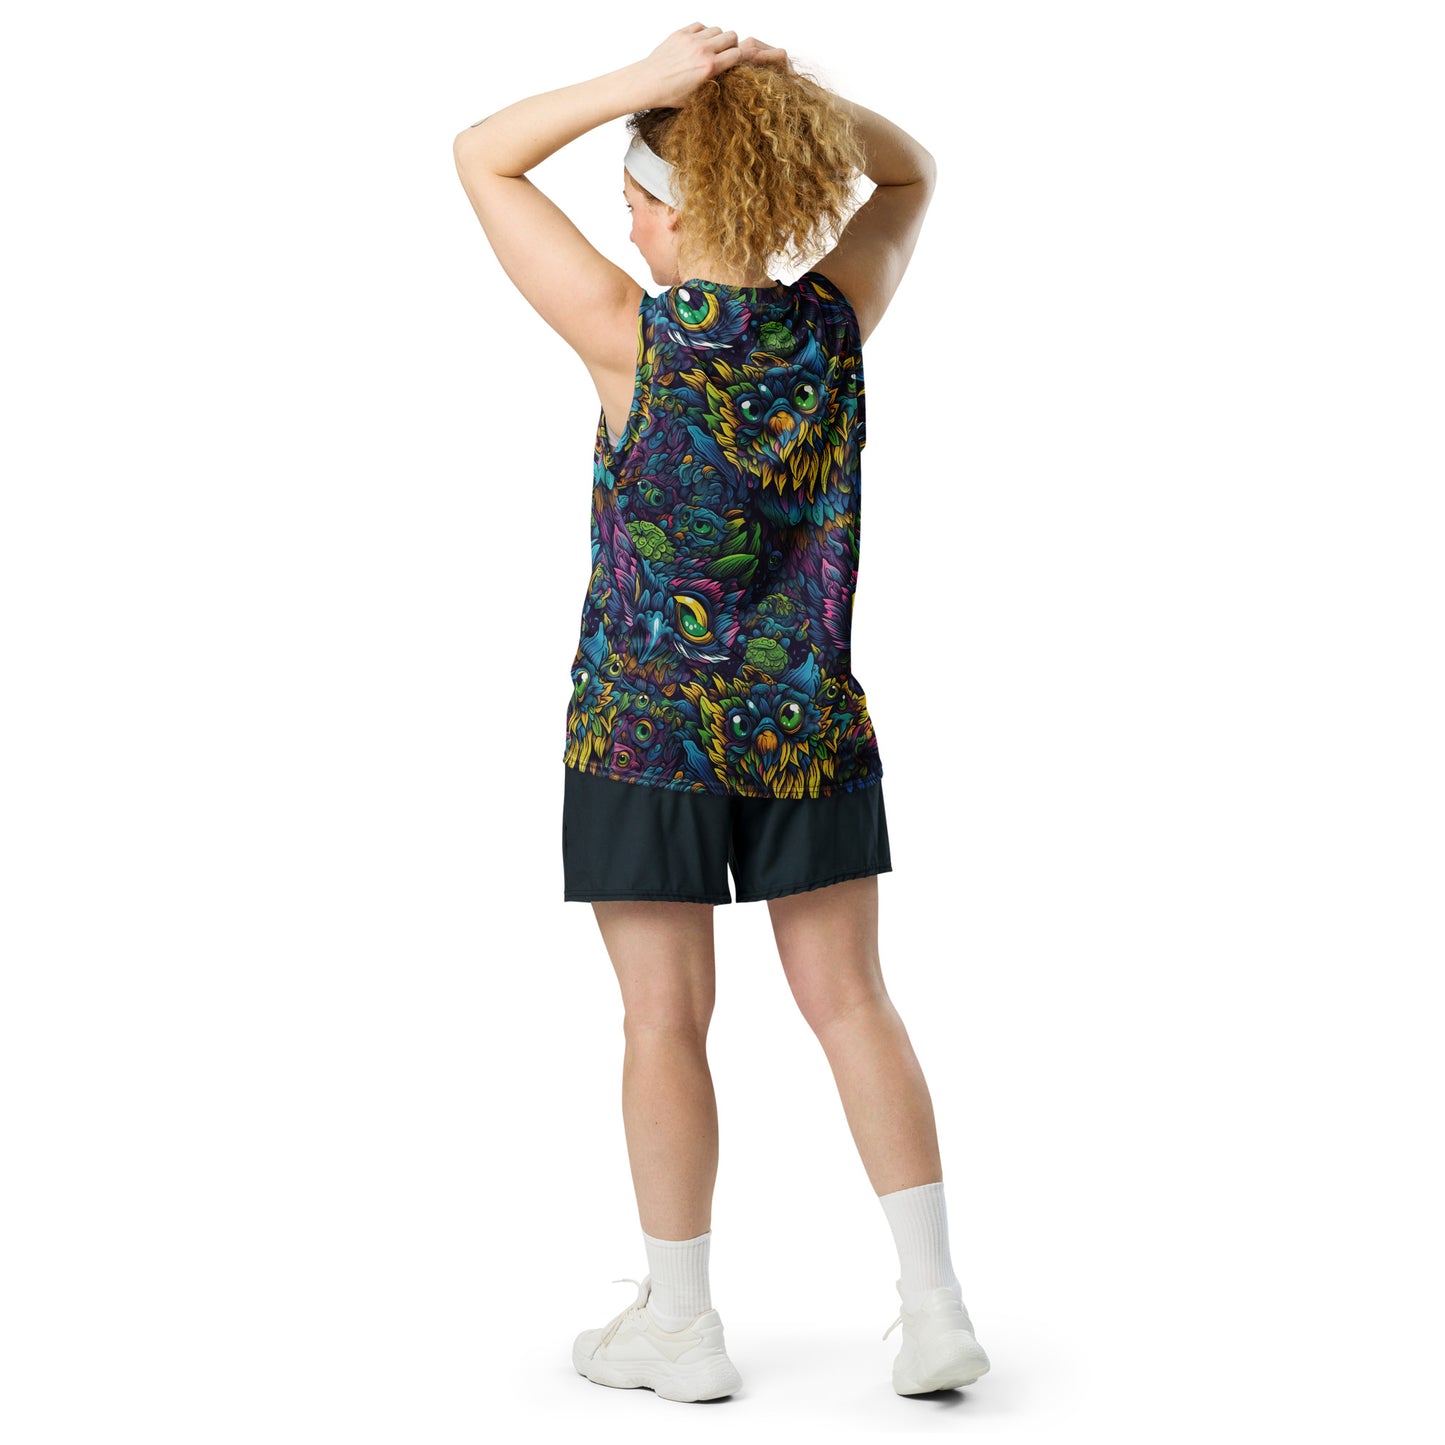 Trippy Owl Recycled Unisex Basketball Jersey